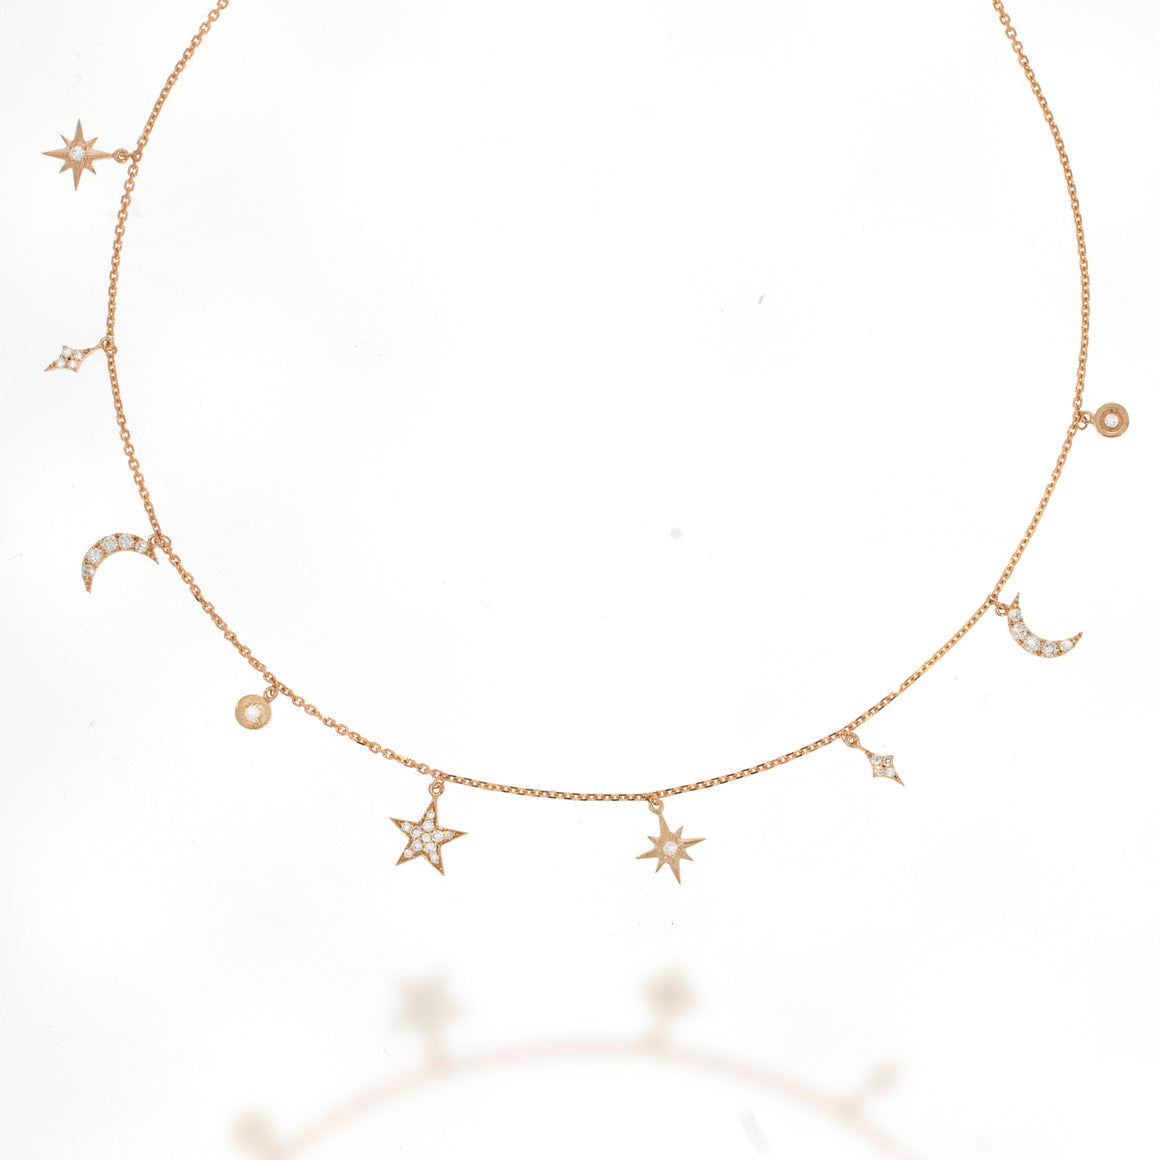 Celestial Jewelry Constellation Necklace Statement Jewelry star northern star charm Necklace | Christmas Gift | 33 diamonds in 18k rose gold